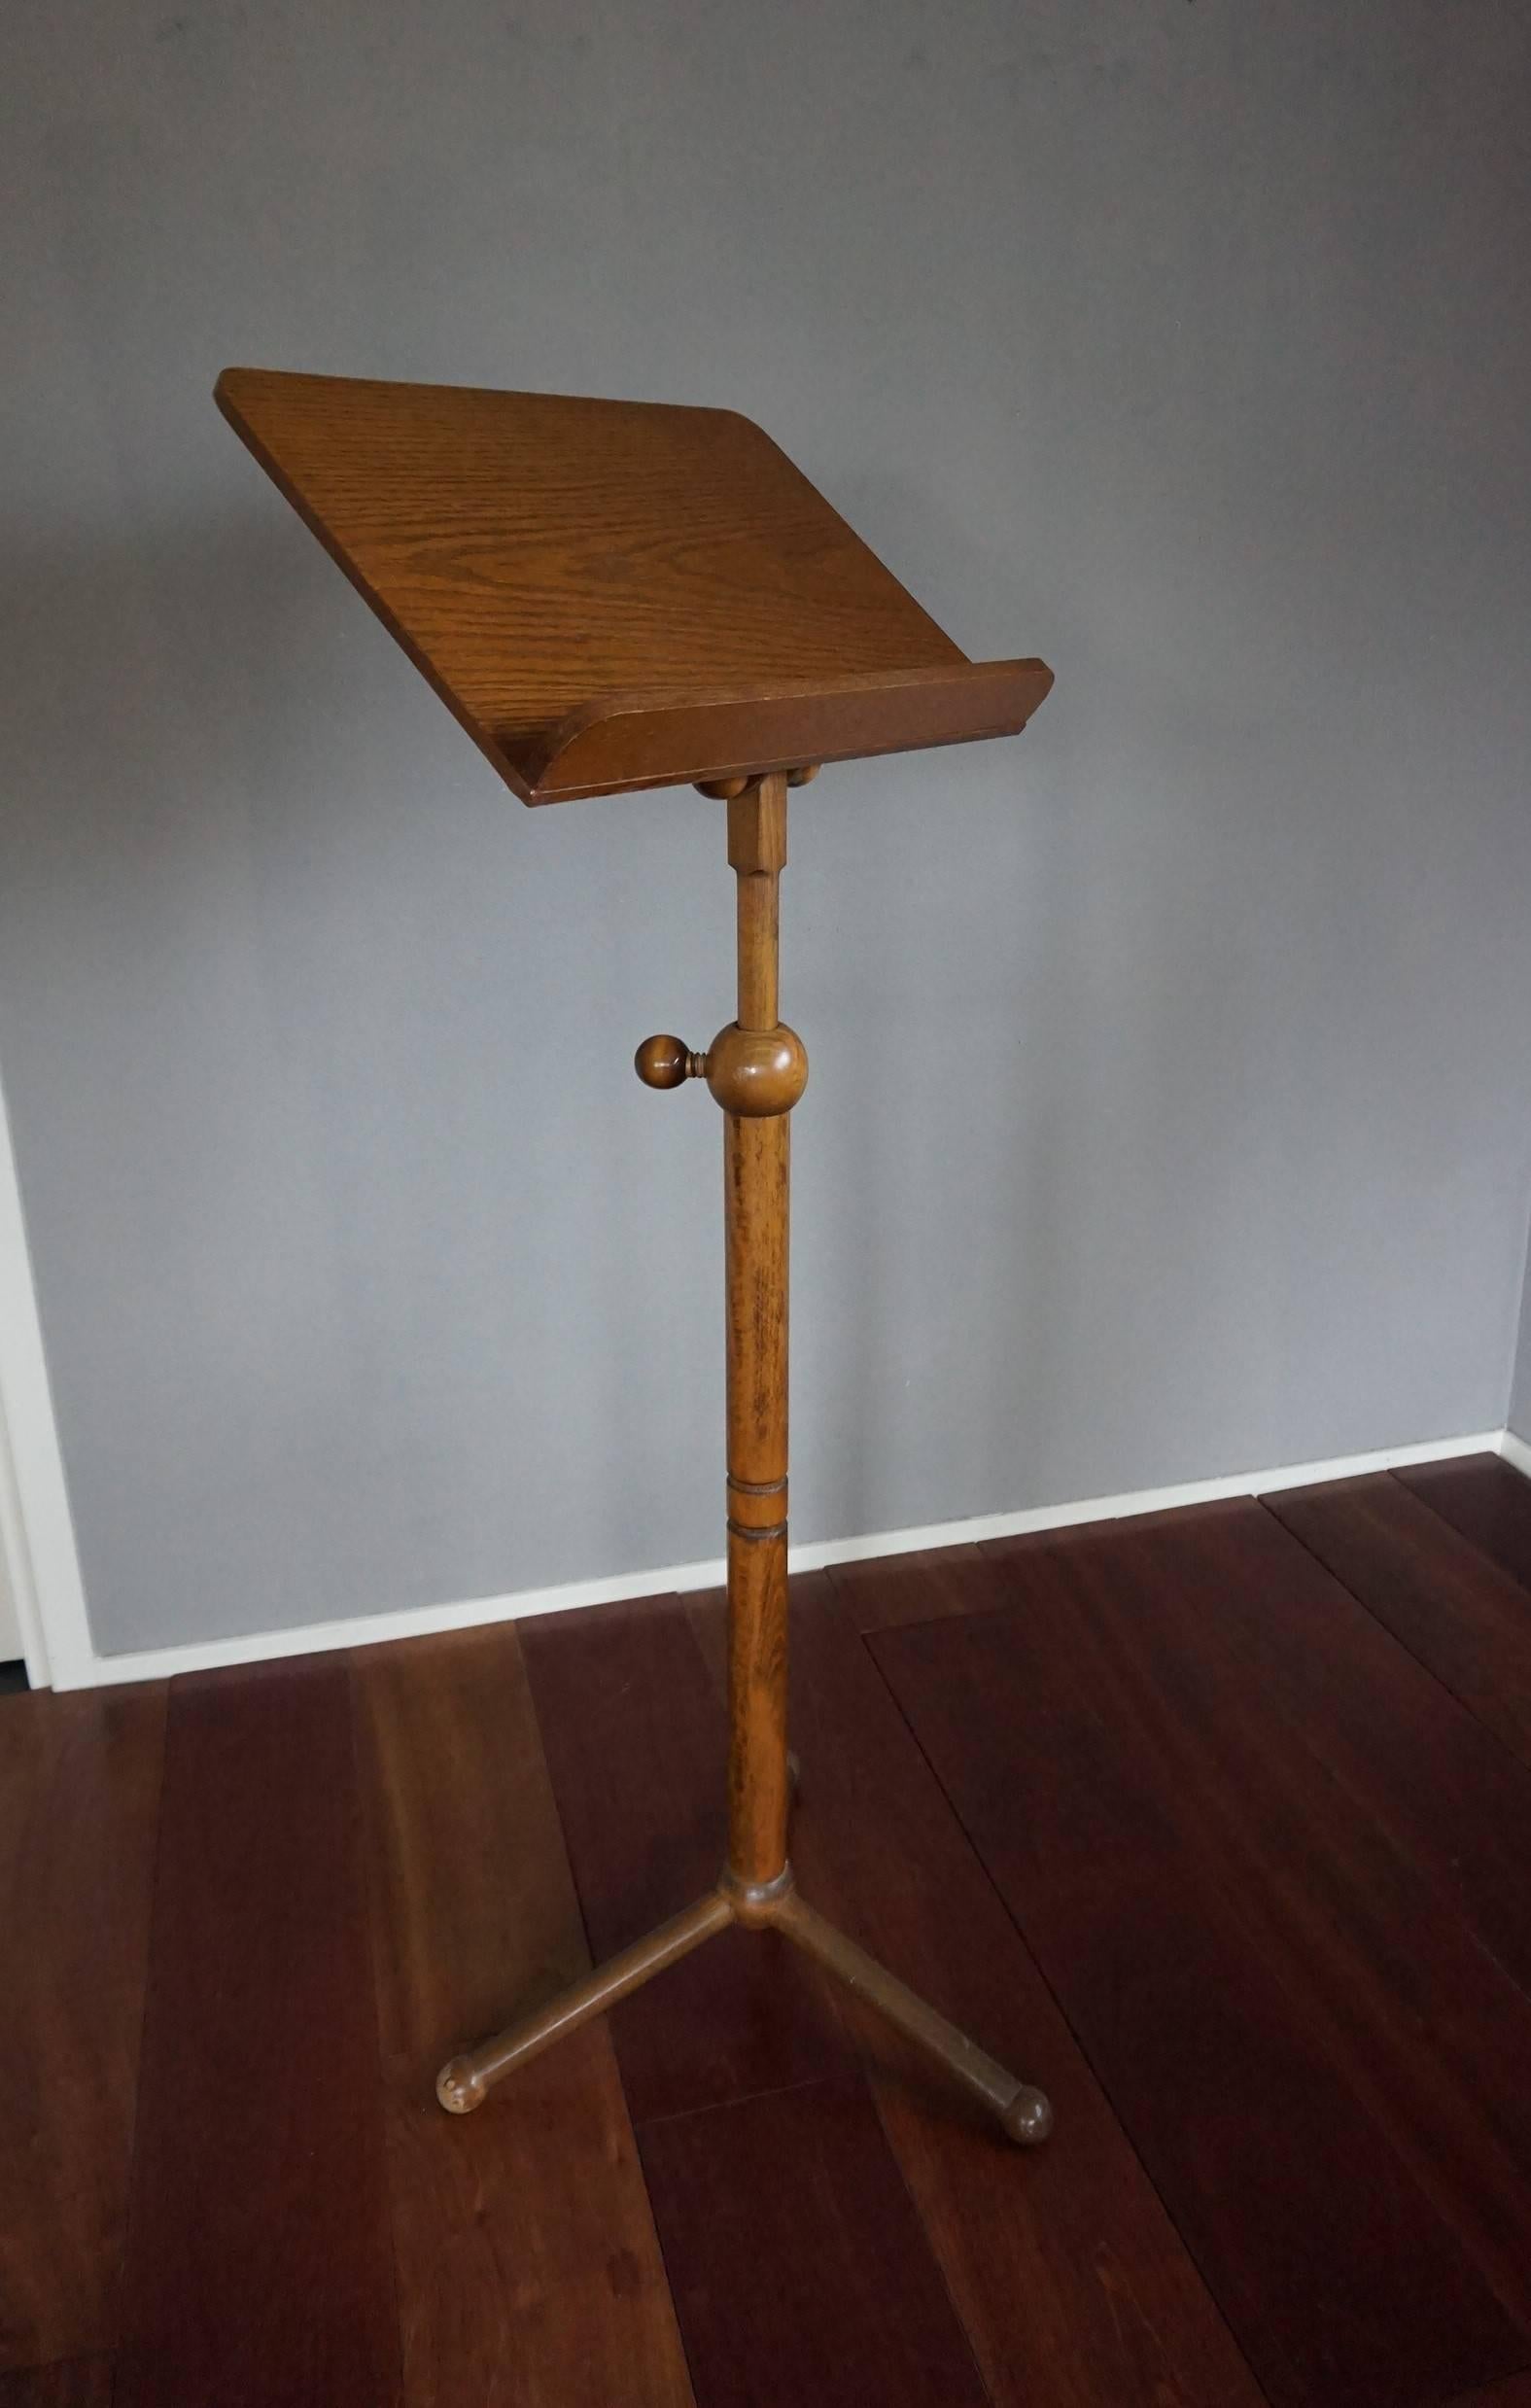 Hand-Crafted Vintage and Rare 1970s Adjustable Wooden Tripod Book or Music Stand